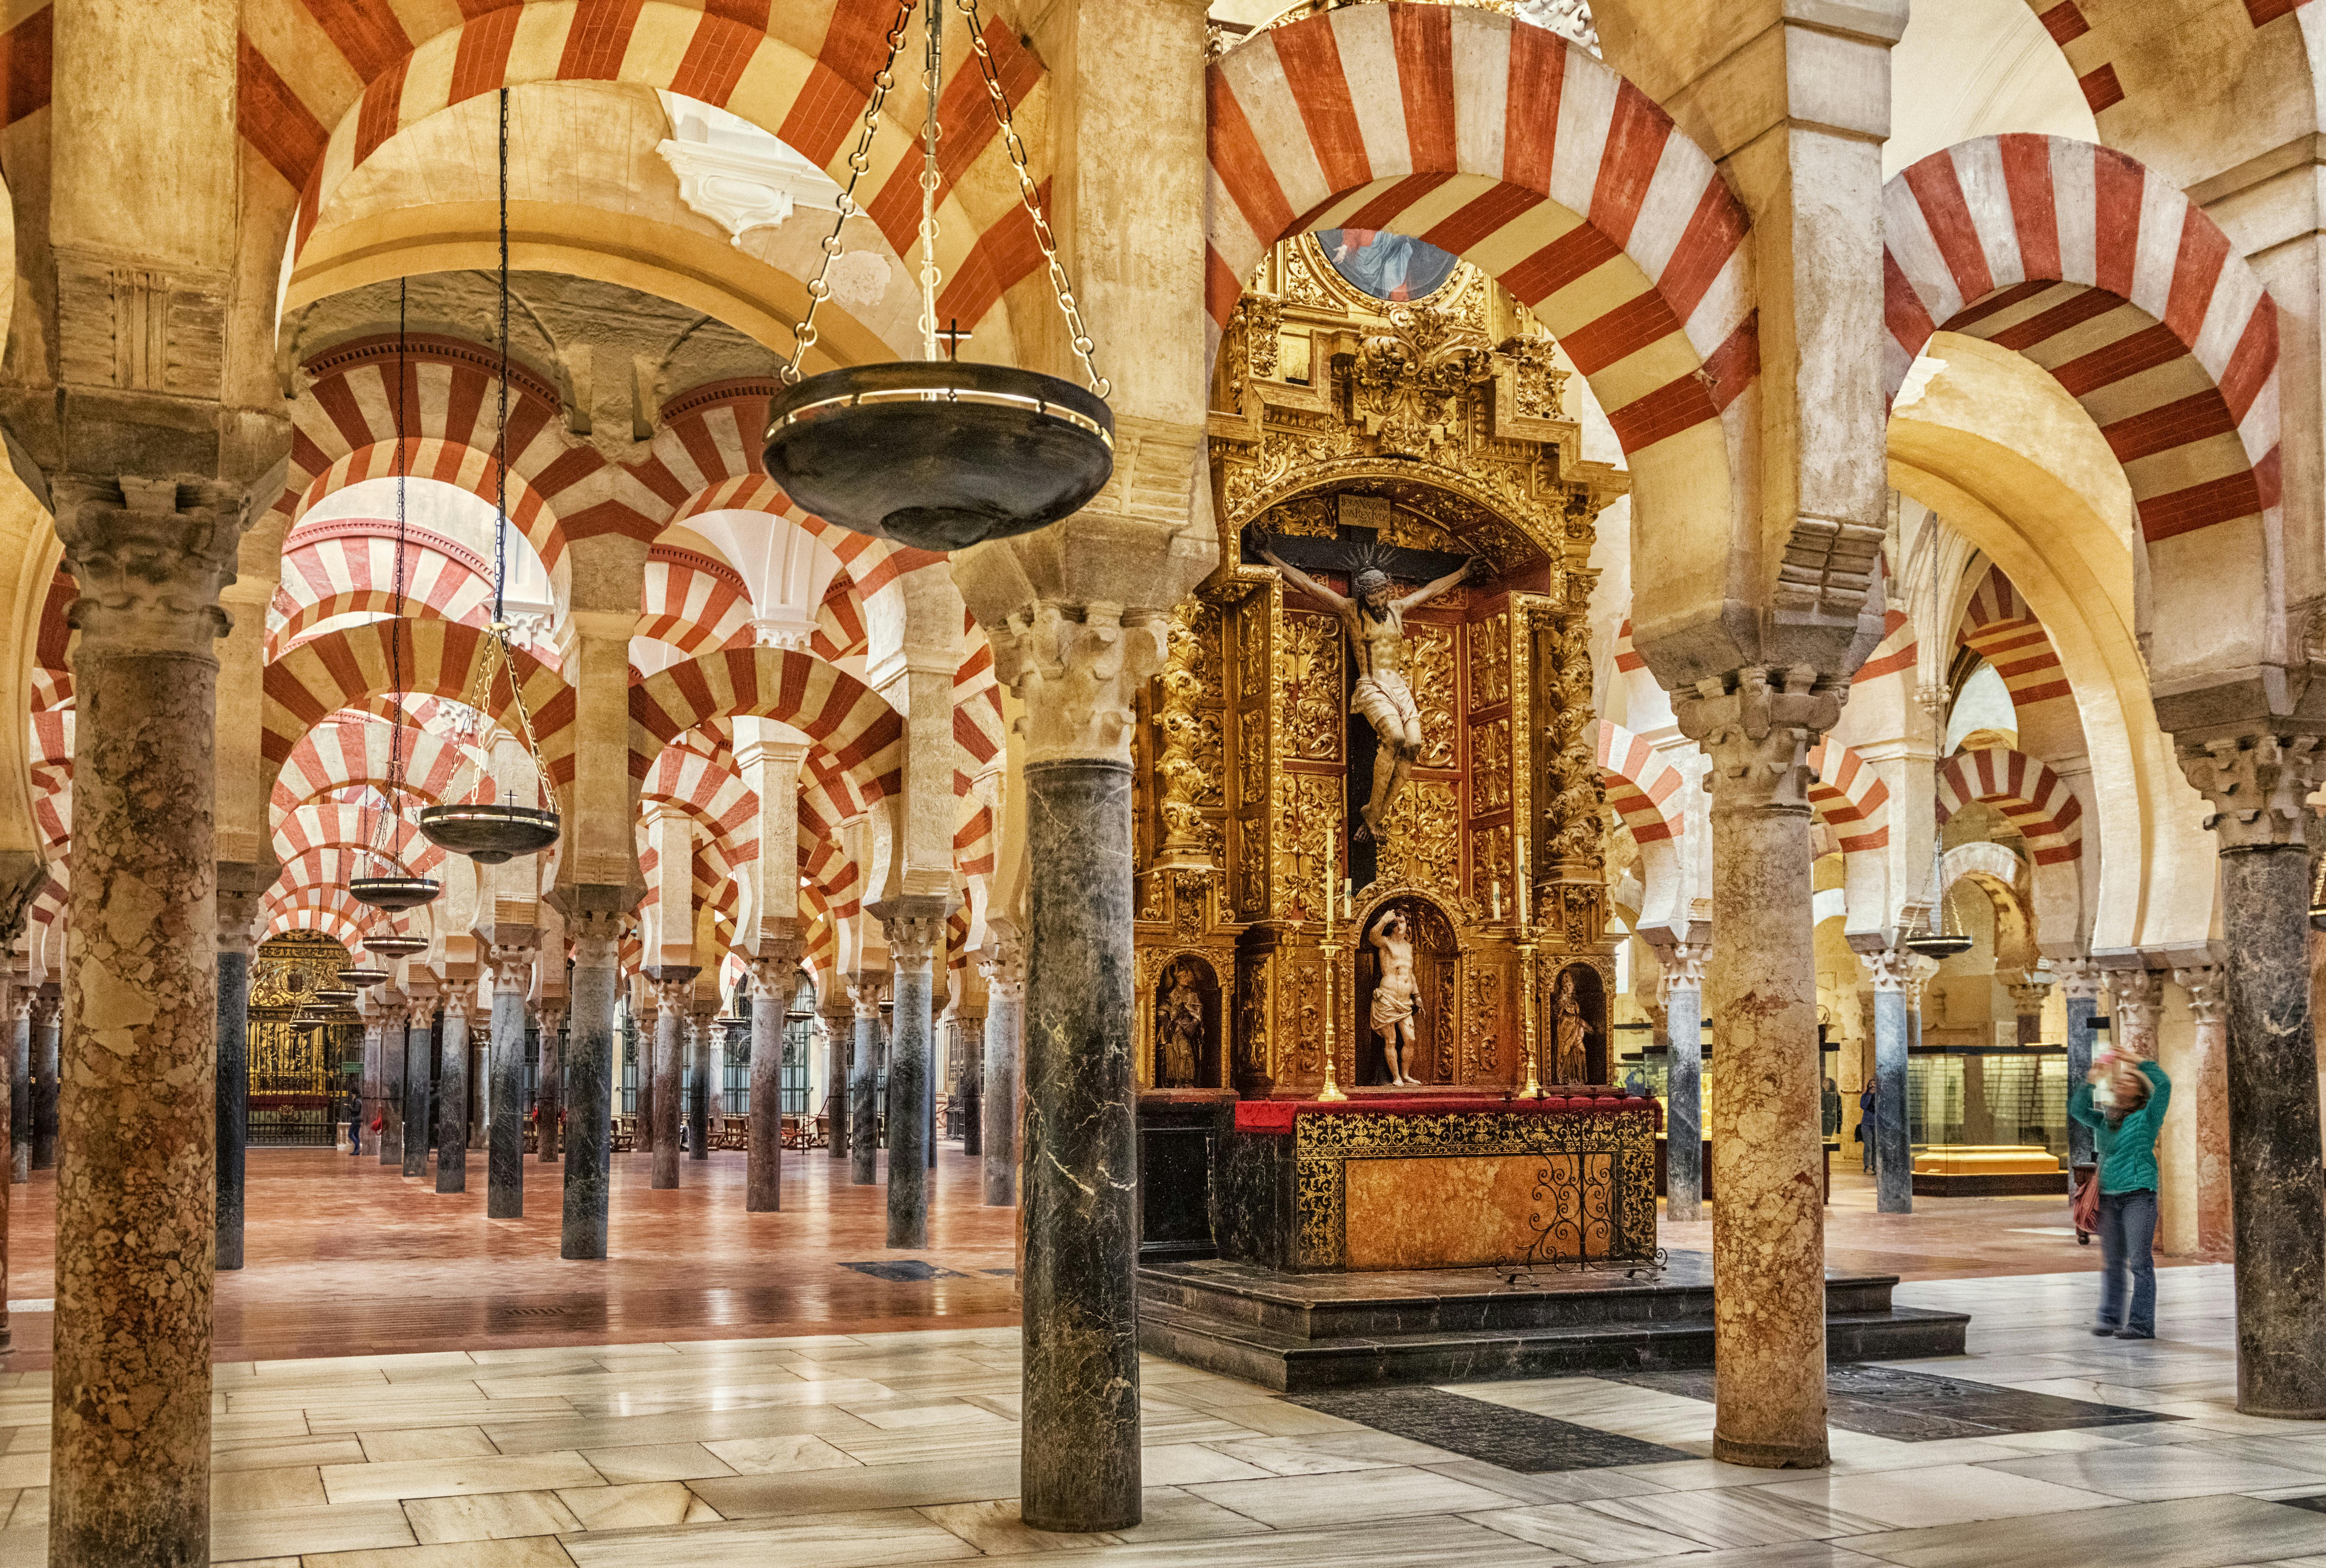 Mosque-Cathedral of Córdoba small-group tour with entrance tickets